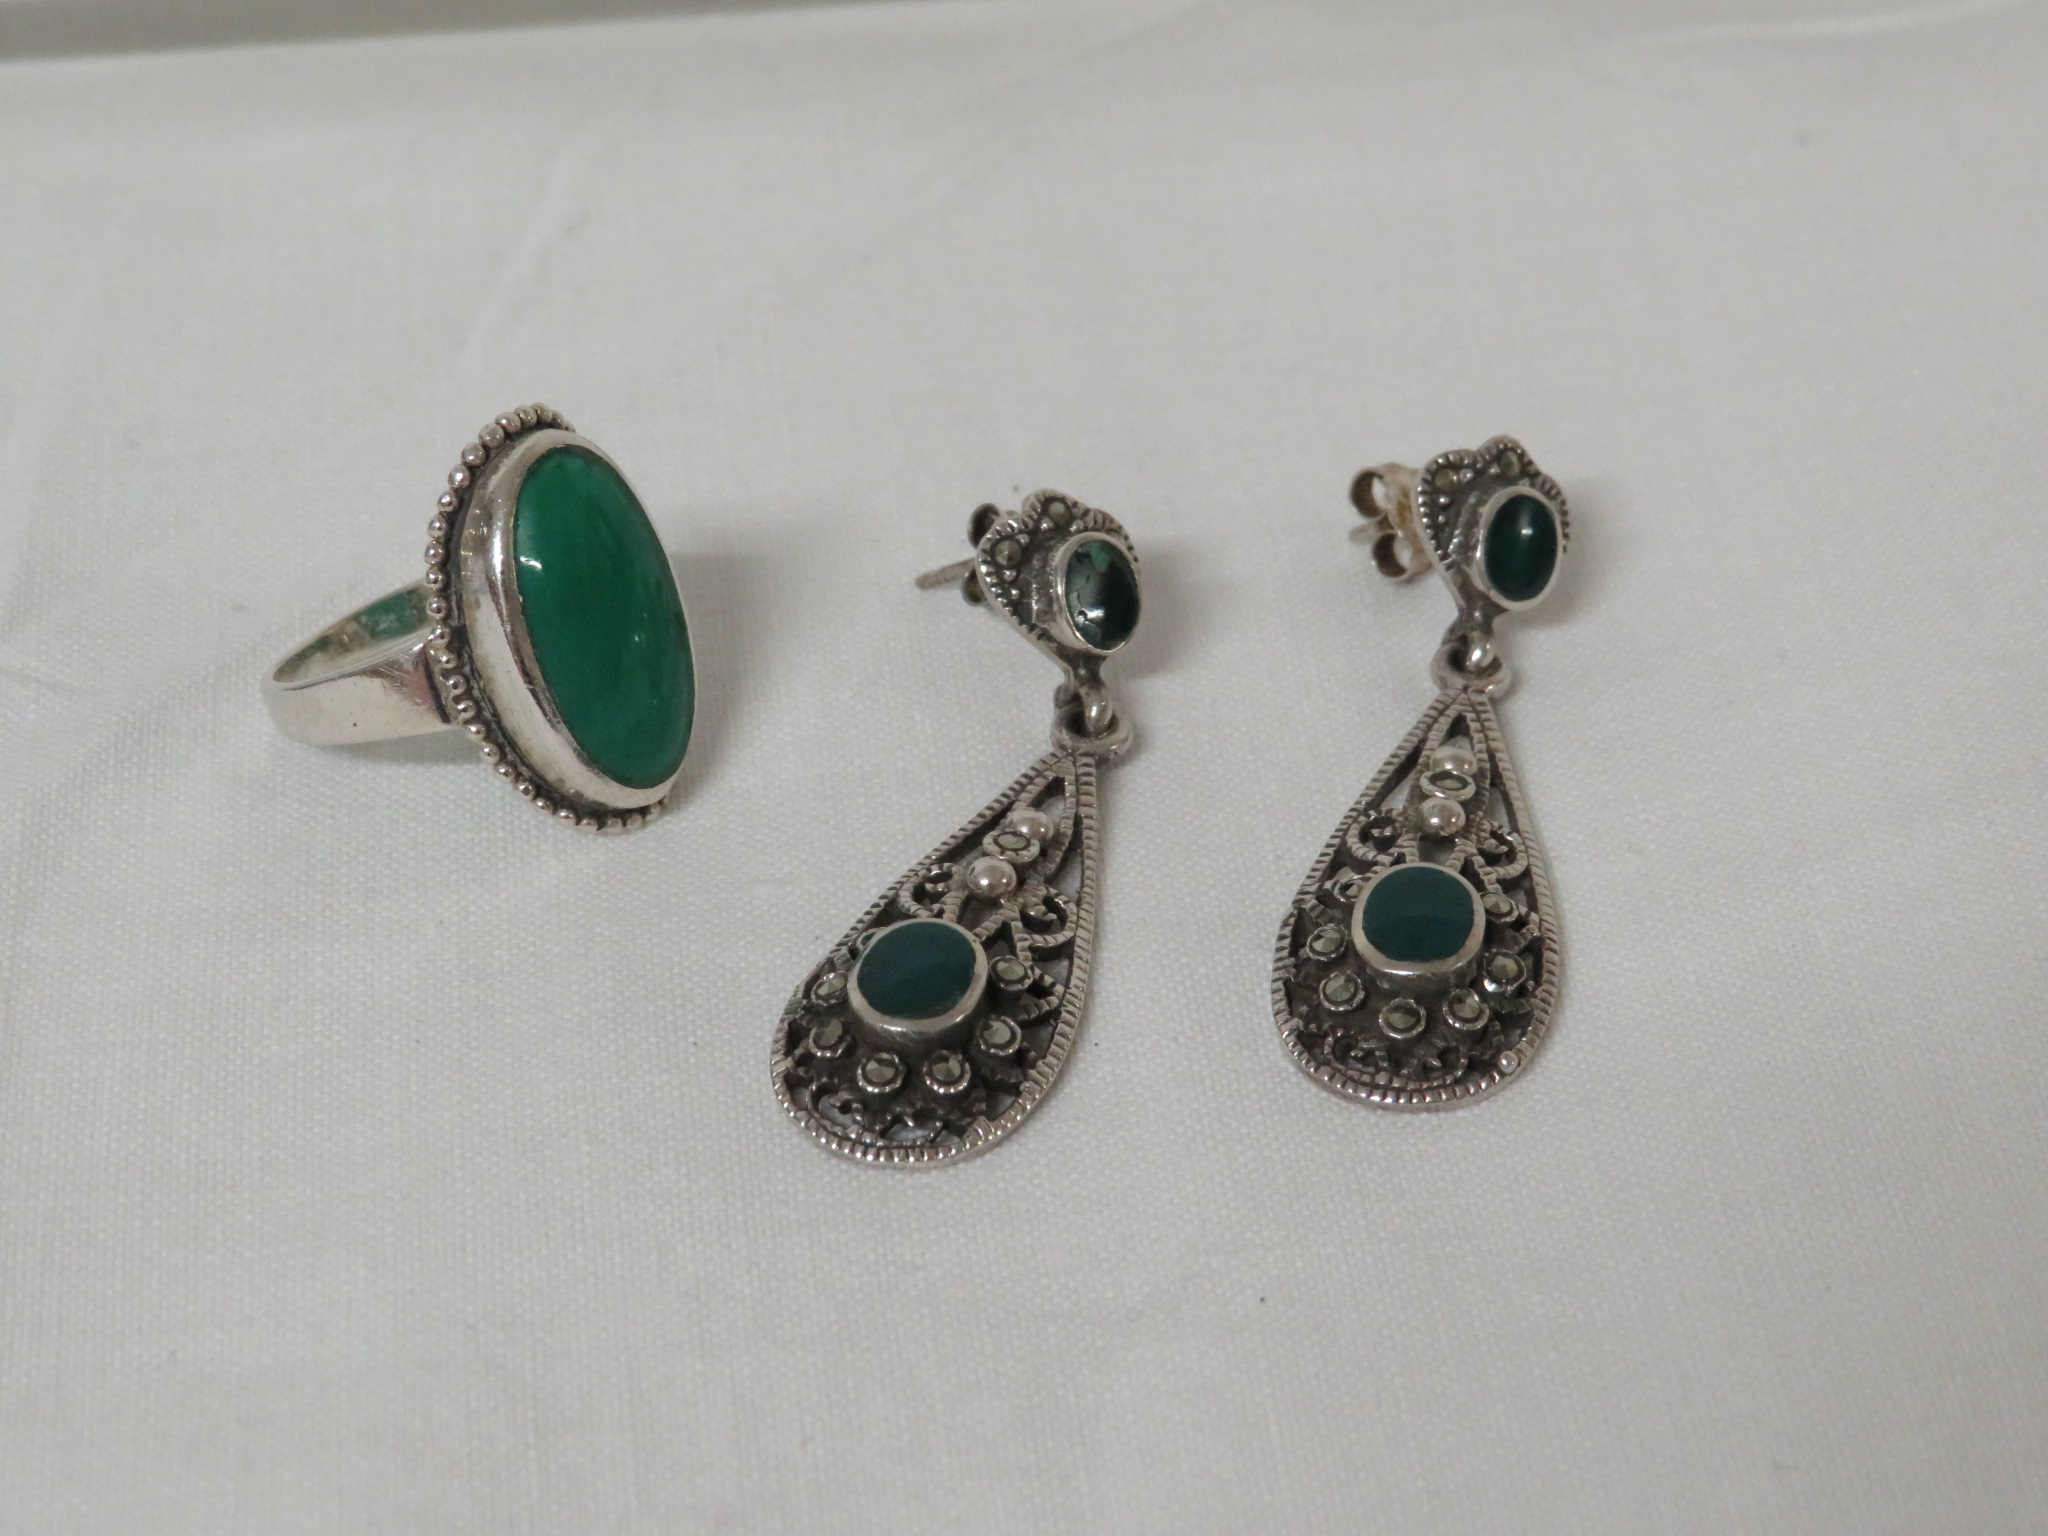 PAIR OF 925 WHITE METAL EARRINGS SET WITH GREEN STONES AND MARCASITES, AND A 925 WHITE METAL DRESS - Image 3 of 3